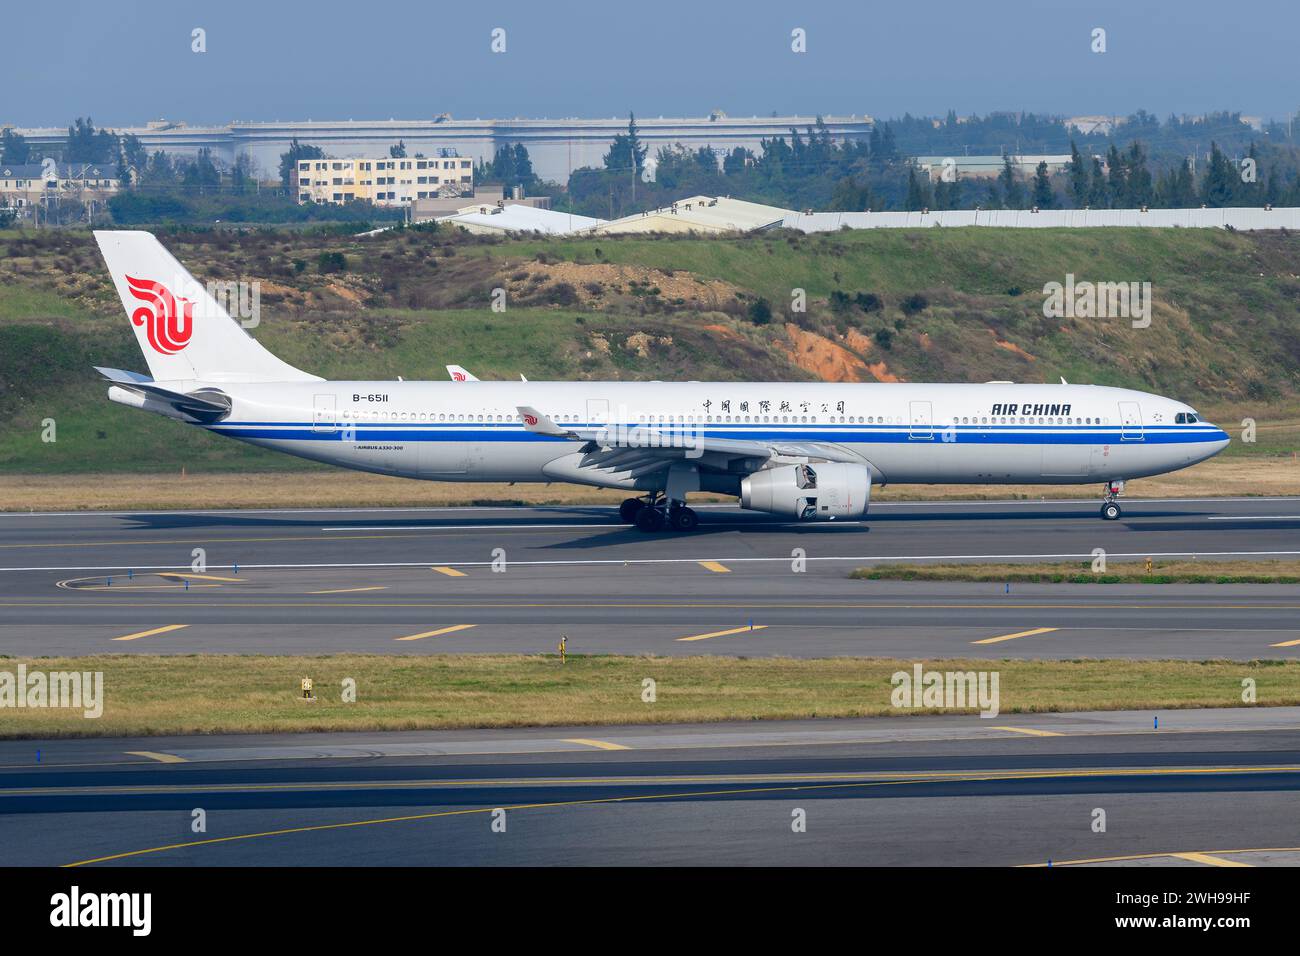 Air China Airbus A330 aircraft landing. Airplane A330-300 of Chinese airline Air China. Airplane of AirChina registered as B-6511. Stock Photo